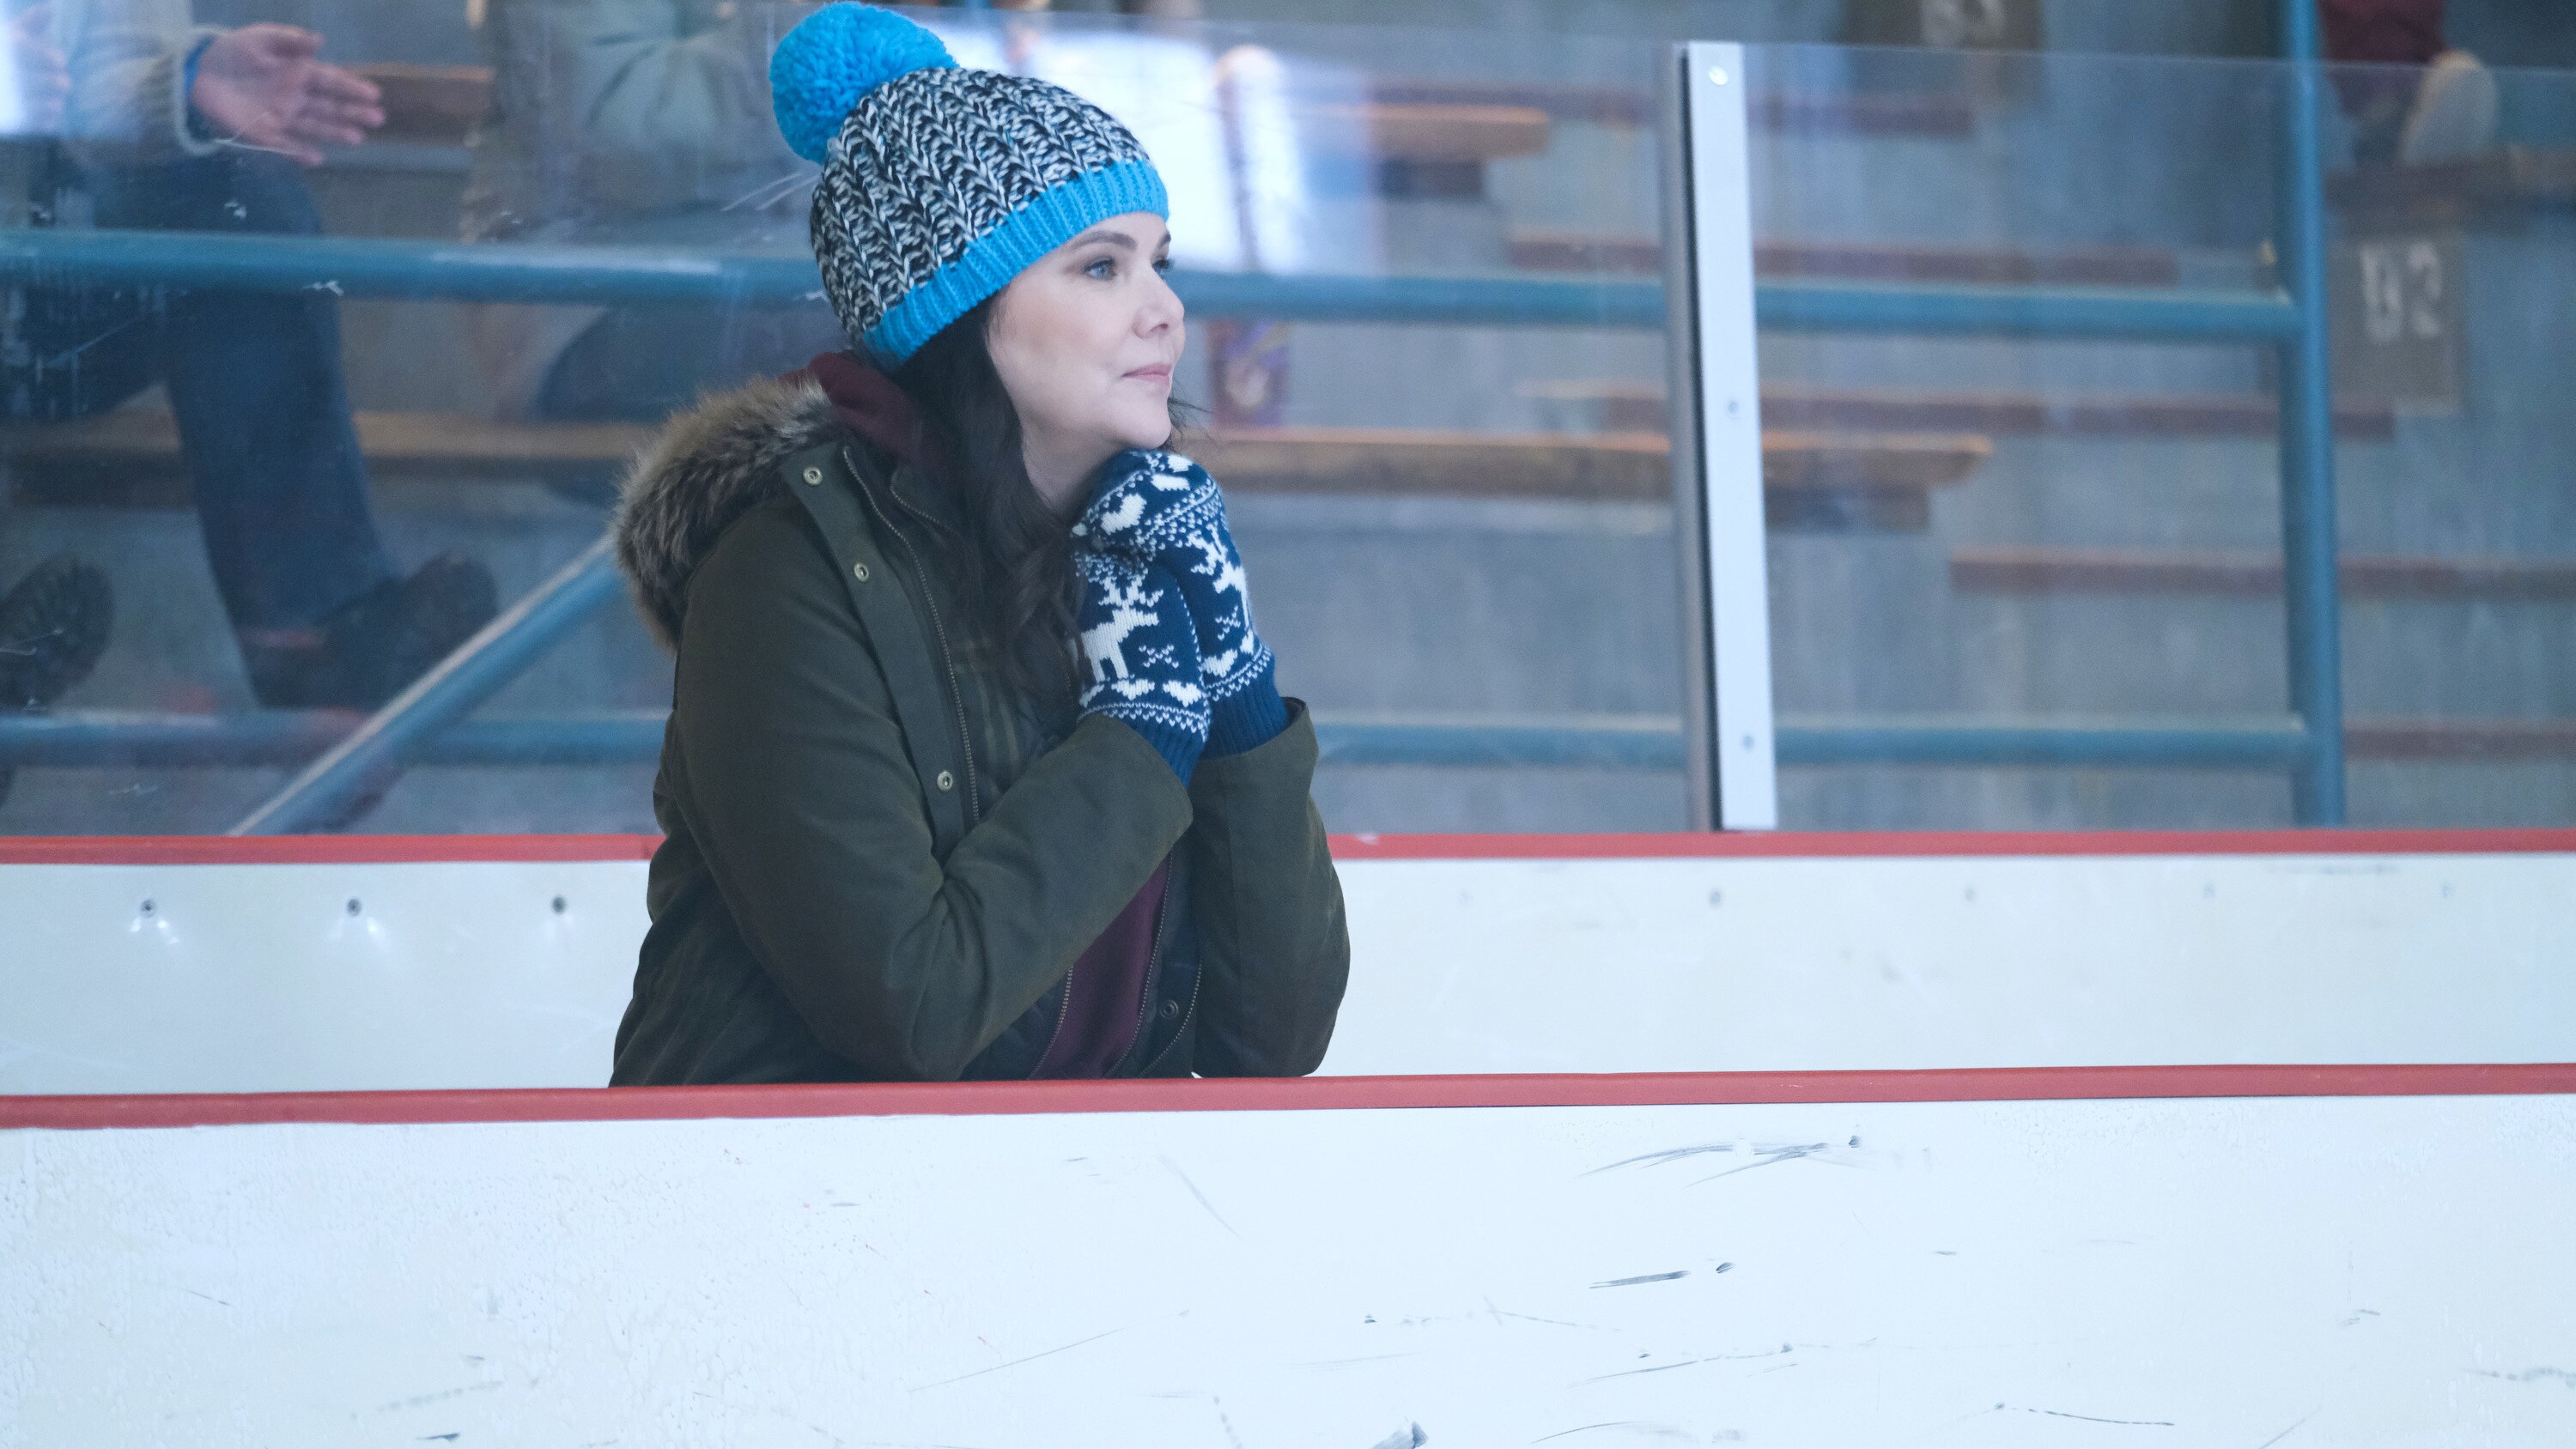 THE MIGHTY DUCKS: GAME CHANGERS - "Dusters" - Evan is skeptical of Alex’s unique approach to coaching, as the team gets ready for its first game. (Disney/Liane Hentscher) LAUREN GRAHAM